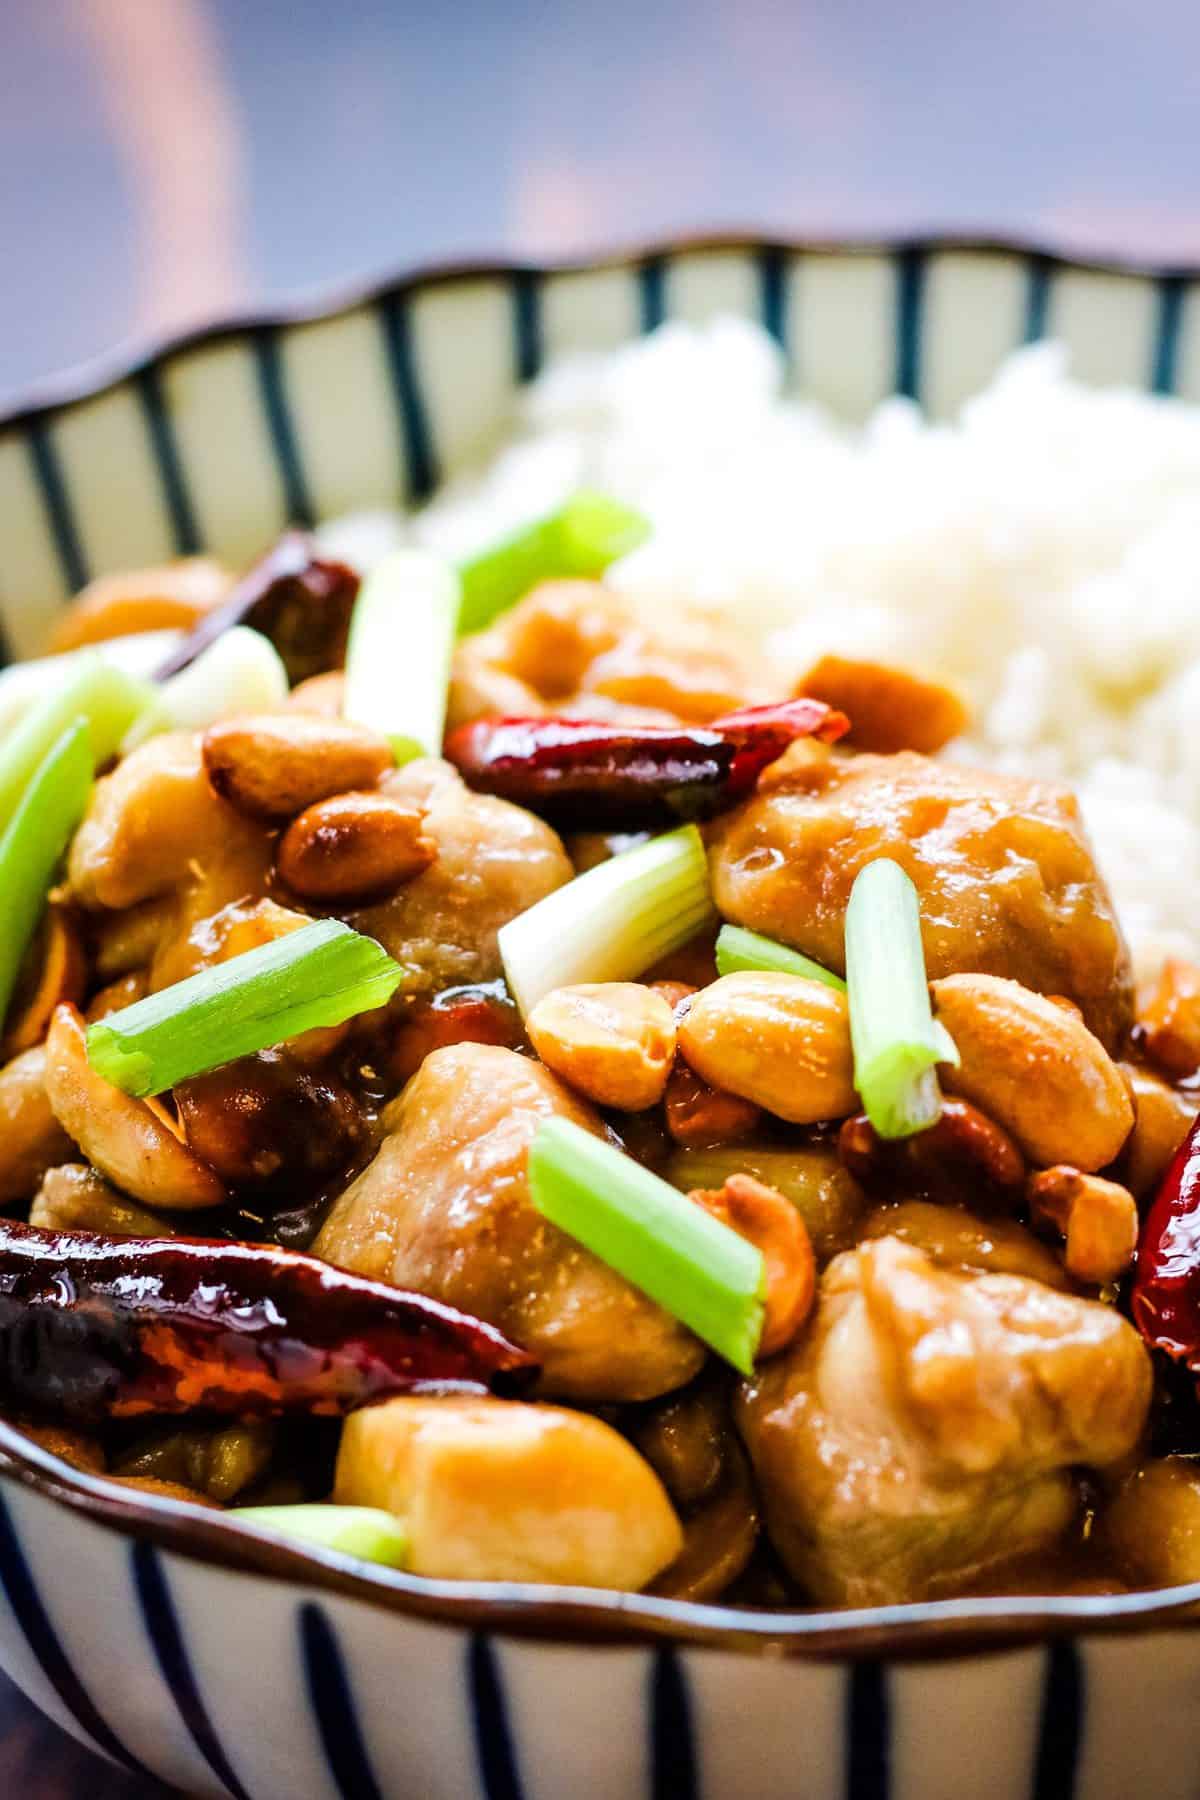 vertical photo of kung pao chicken in a blue and white striped bowl. The chicken is cooked with red chiles, scallions, and peanuts and served alongside white rice.